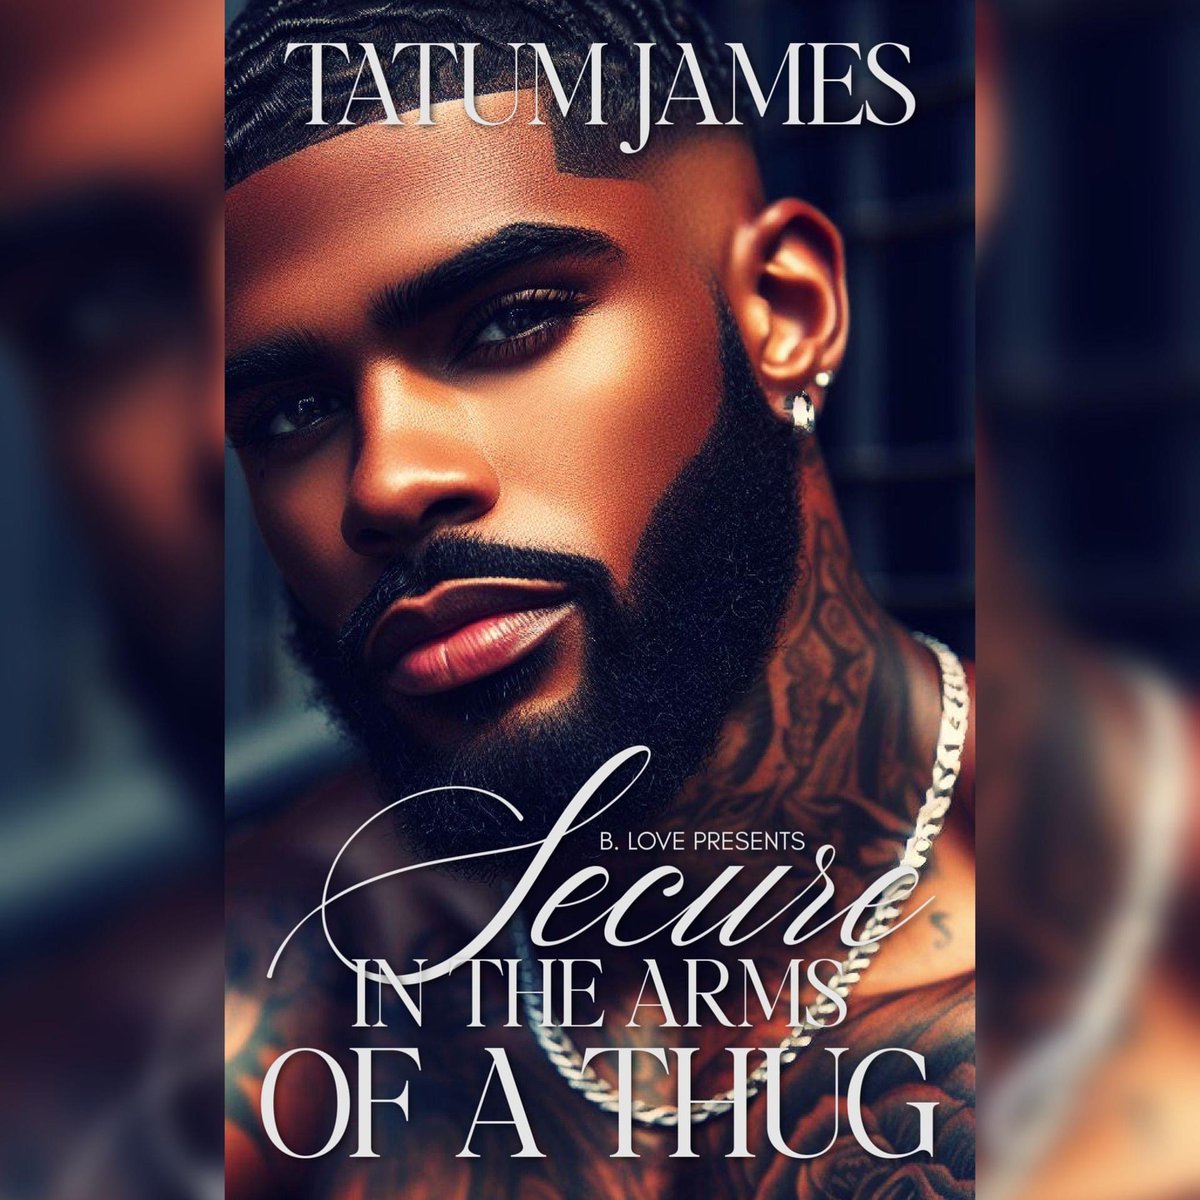 5/3 📚Now he must juggle his new wife and finding out who wants to kill his brother. In a bittersweet story of love and loss, Syre and Royelle form an unbreakable bond. Can their unforgettable love story last forever?
.
.
.
#romancereads #blackauthors #authortatumjames